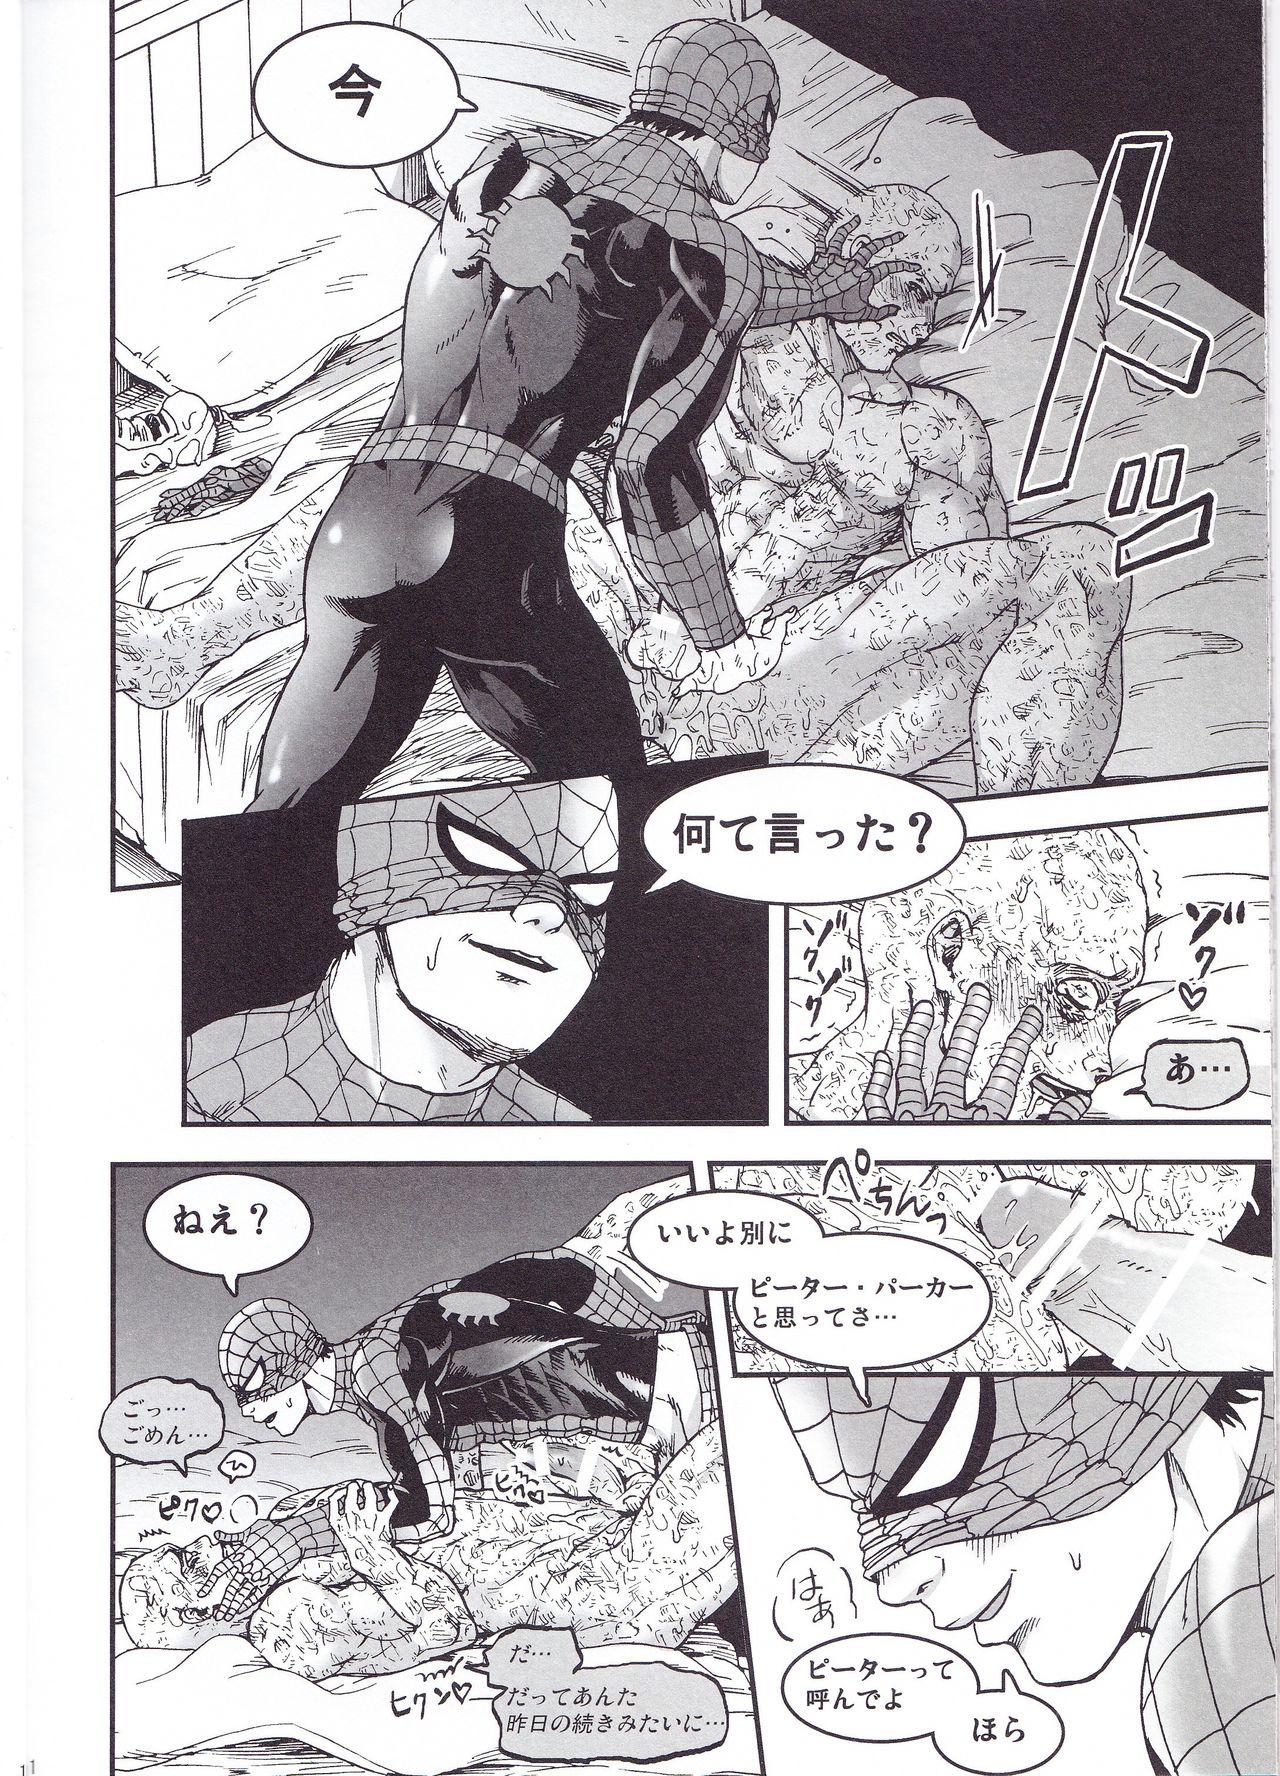 Tributo THREE DAYS 2-3 - Spider-man Deadpool Firsttime - Page 10